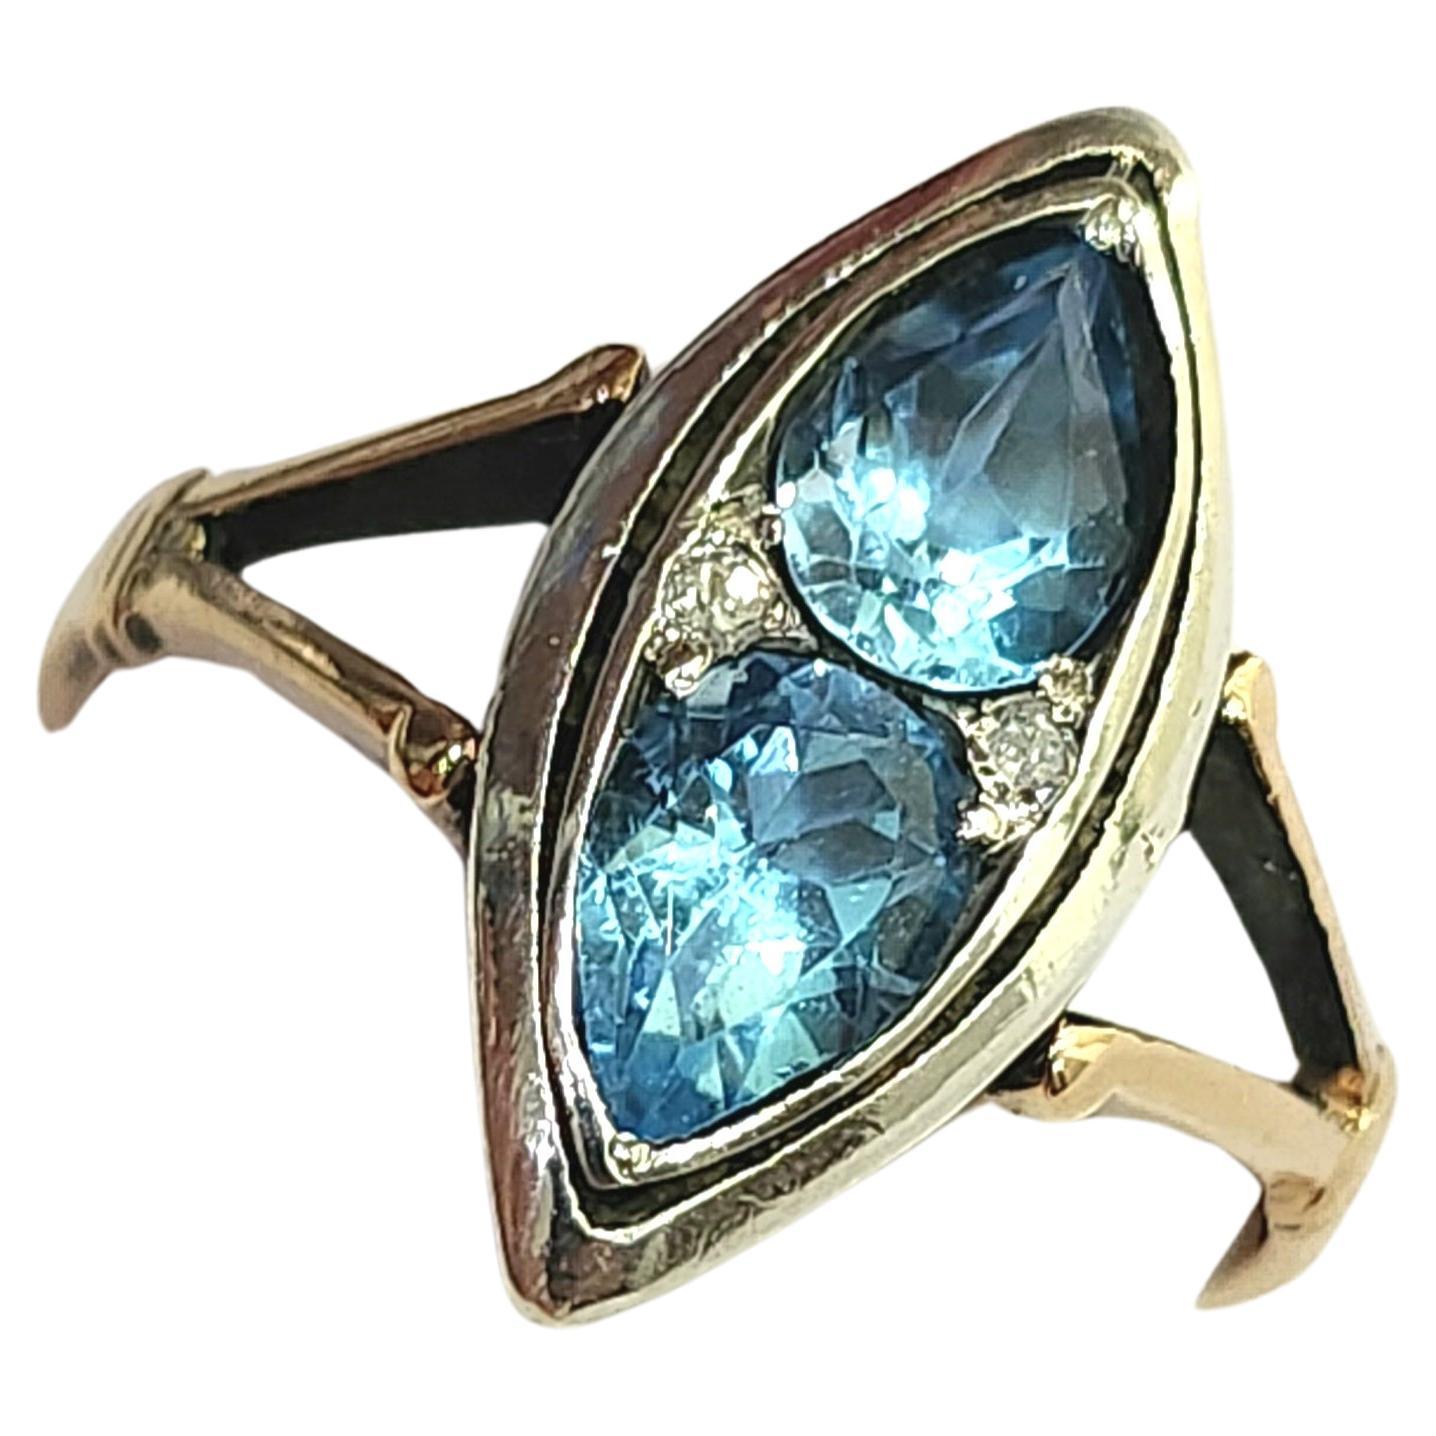 Antique artdeco era ring centered with 2 blue topaz stones in pear cut shape flanked with little diamonds in 14k gold setting topped with silver dates back to 1930s